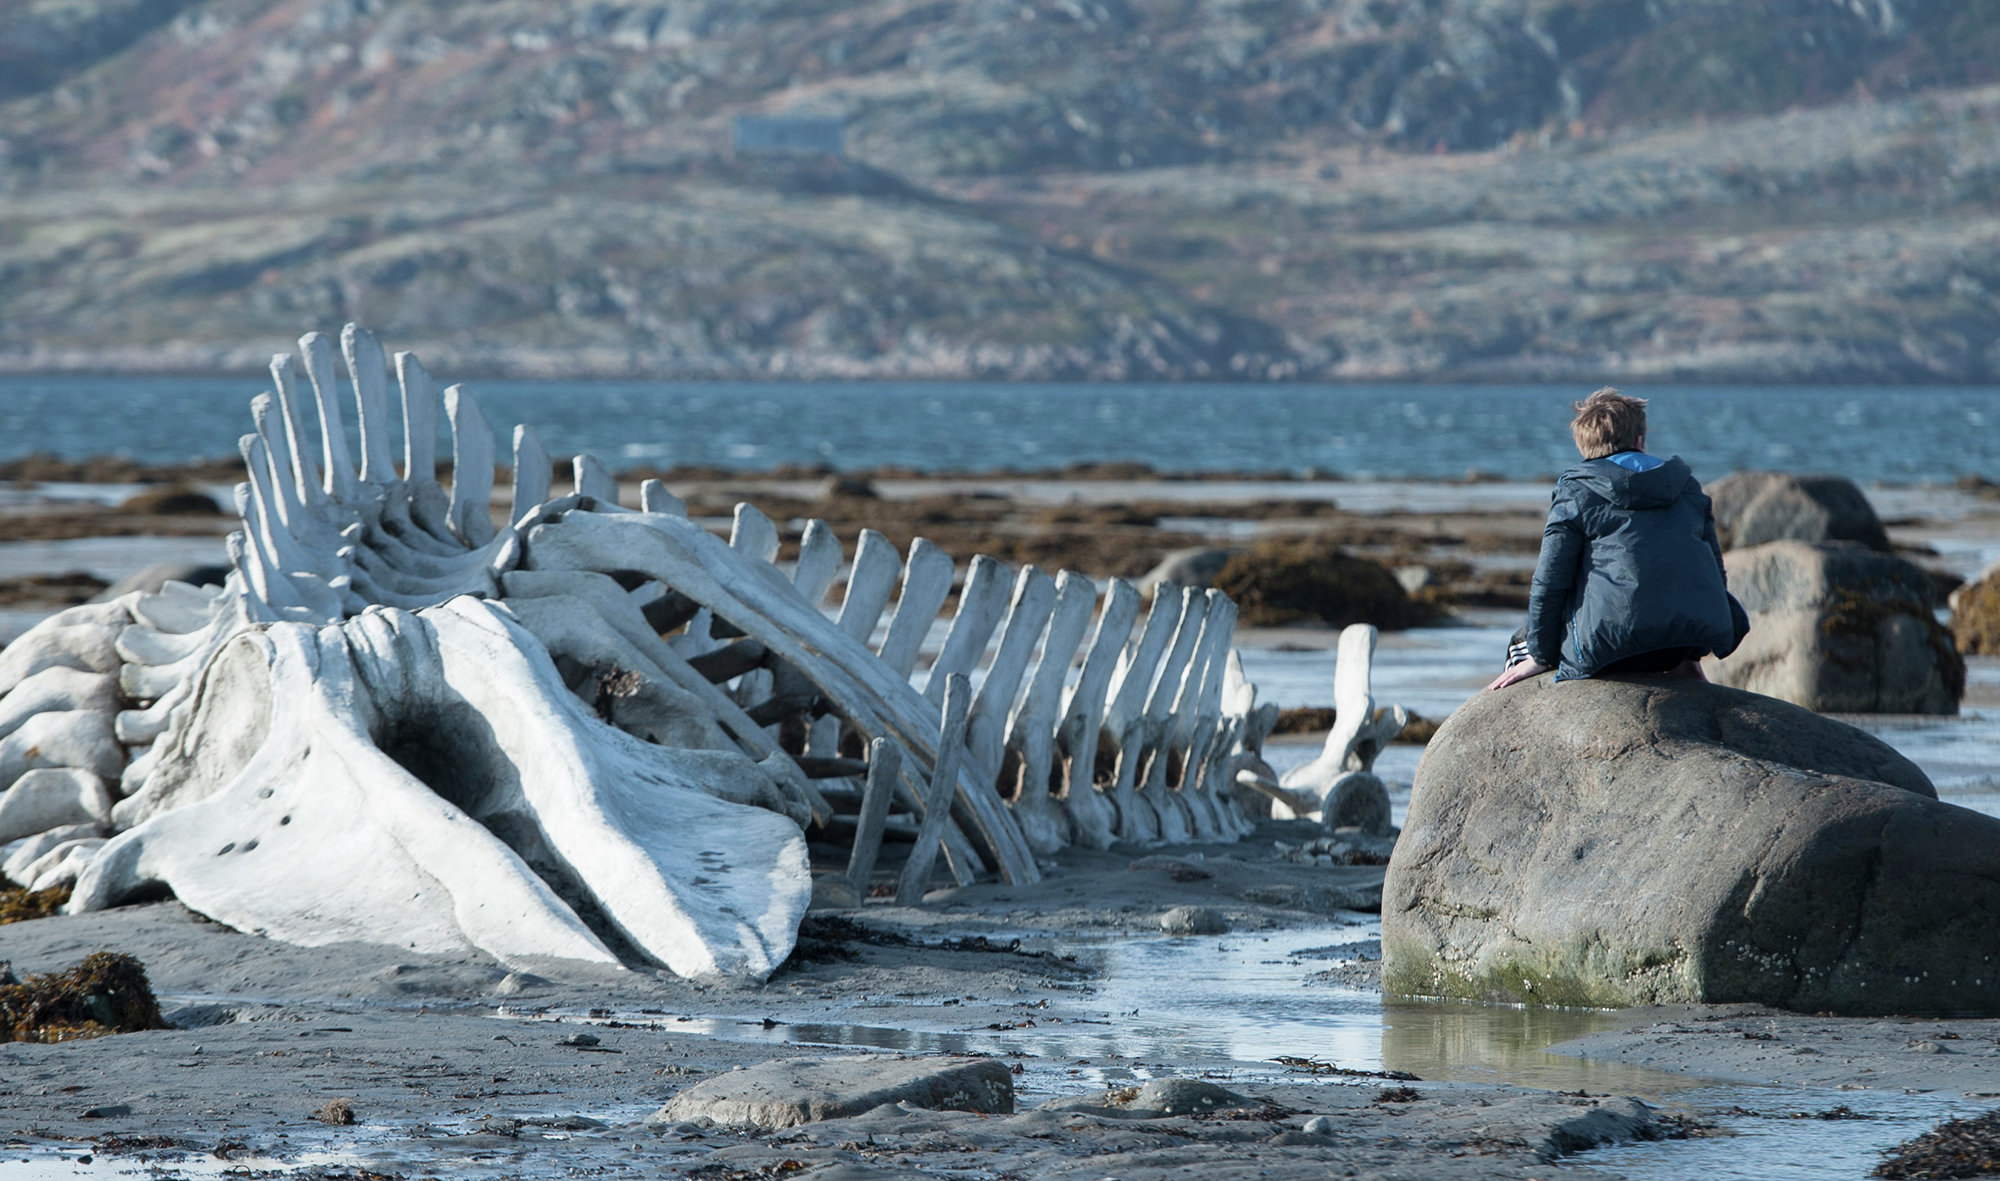 Russia's Golden Globe winner 'Leviathan' directed by Andrei Zvyagintsev was nominated Thursday for the best foreign language film Oscar.